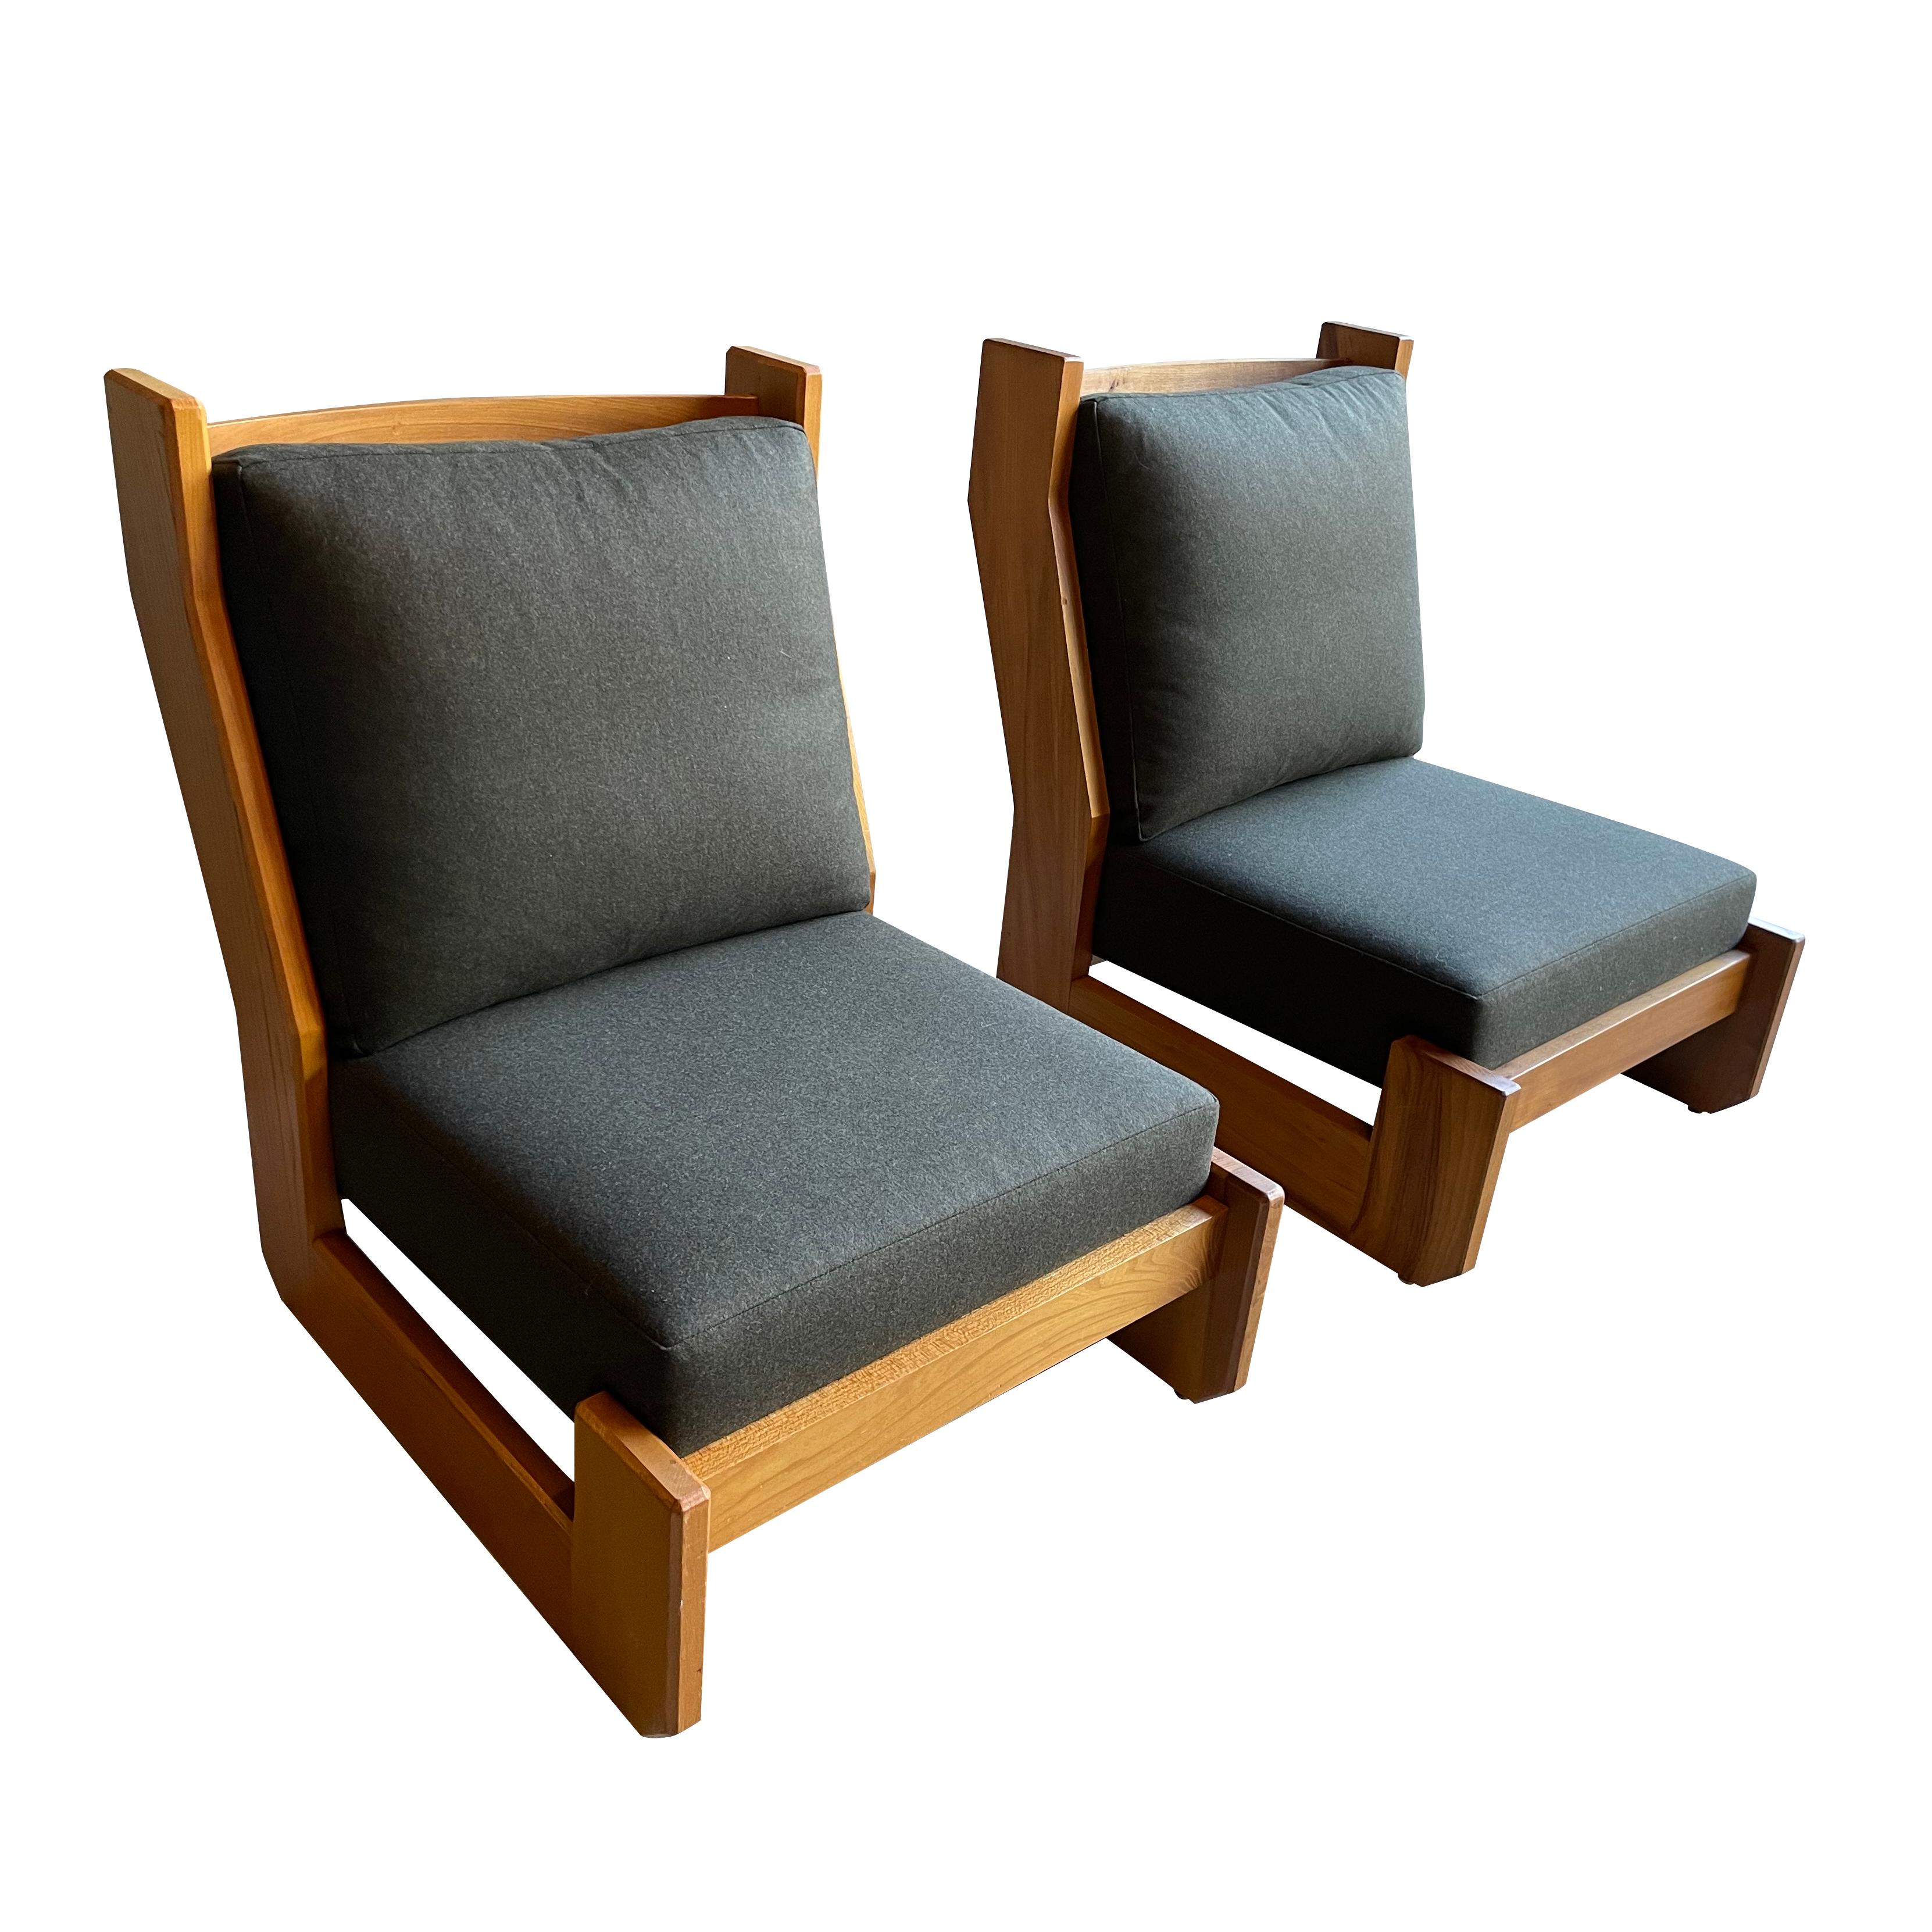 Pair of Lounge Chairs, Maison Regain, France, 1980's For Sale 3